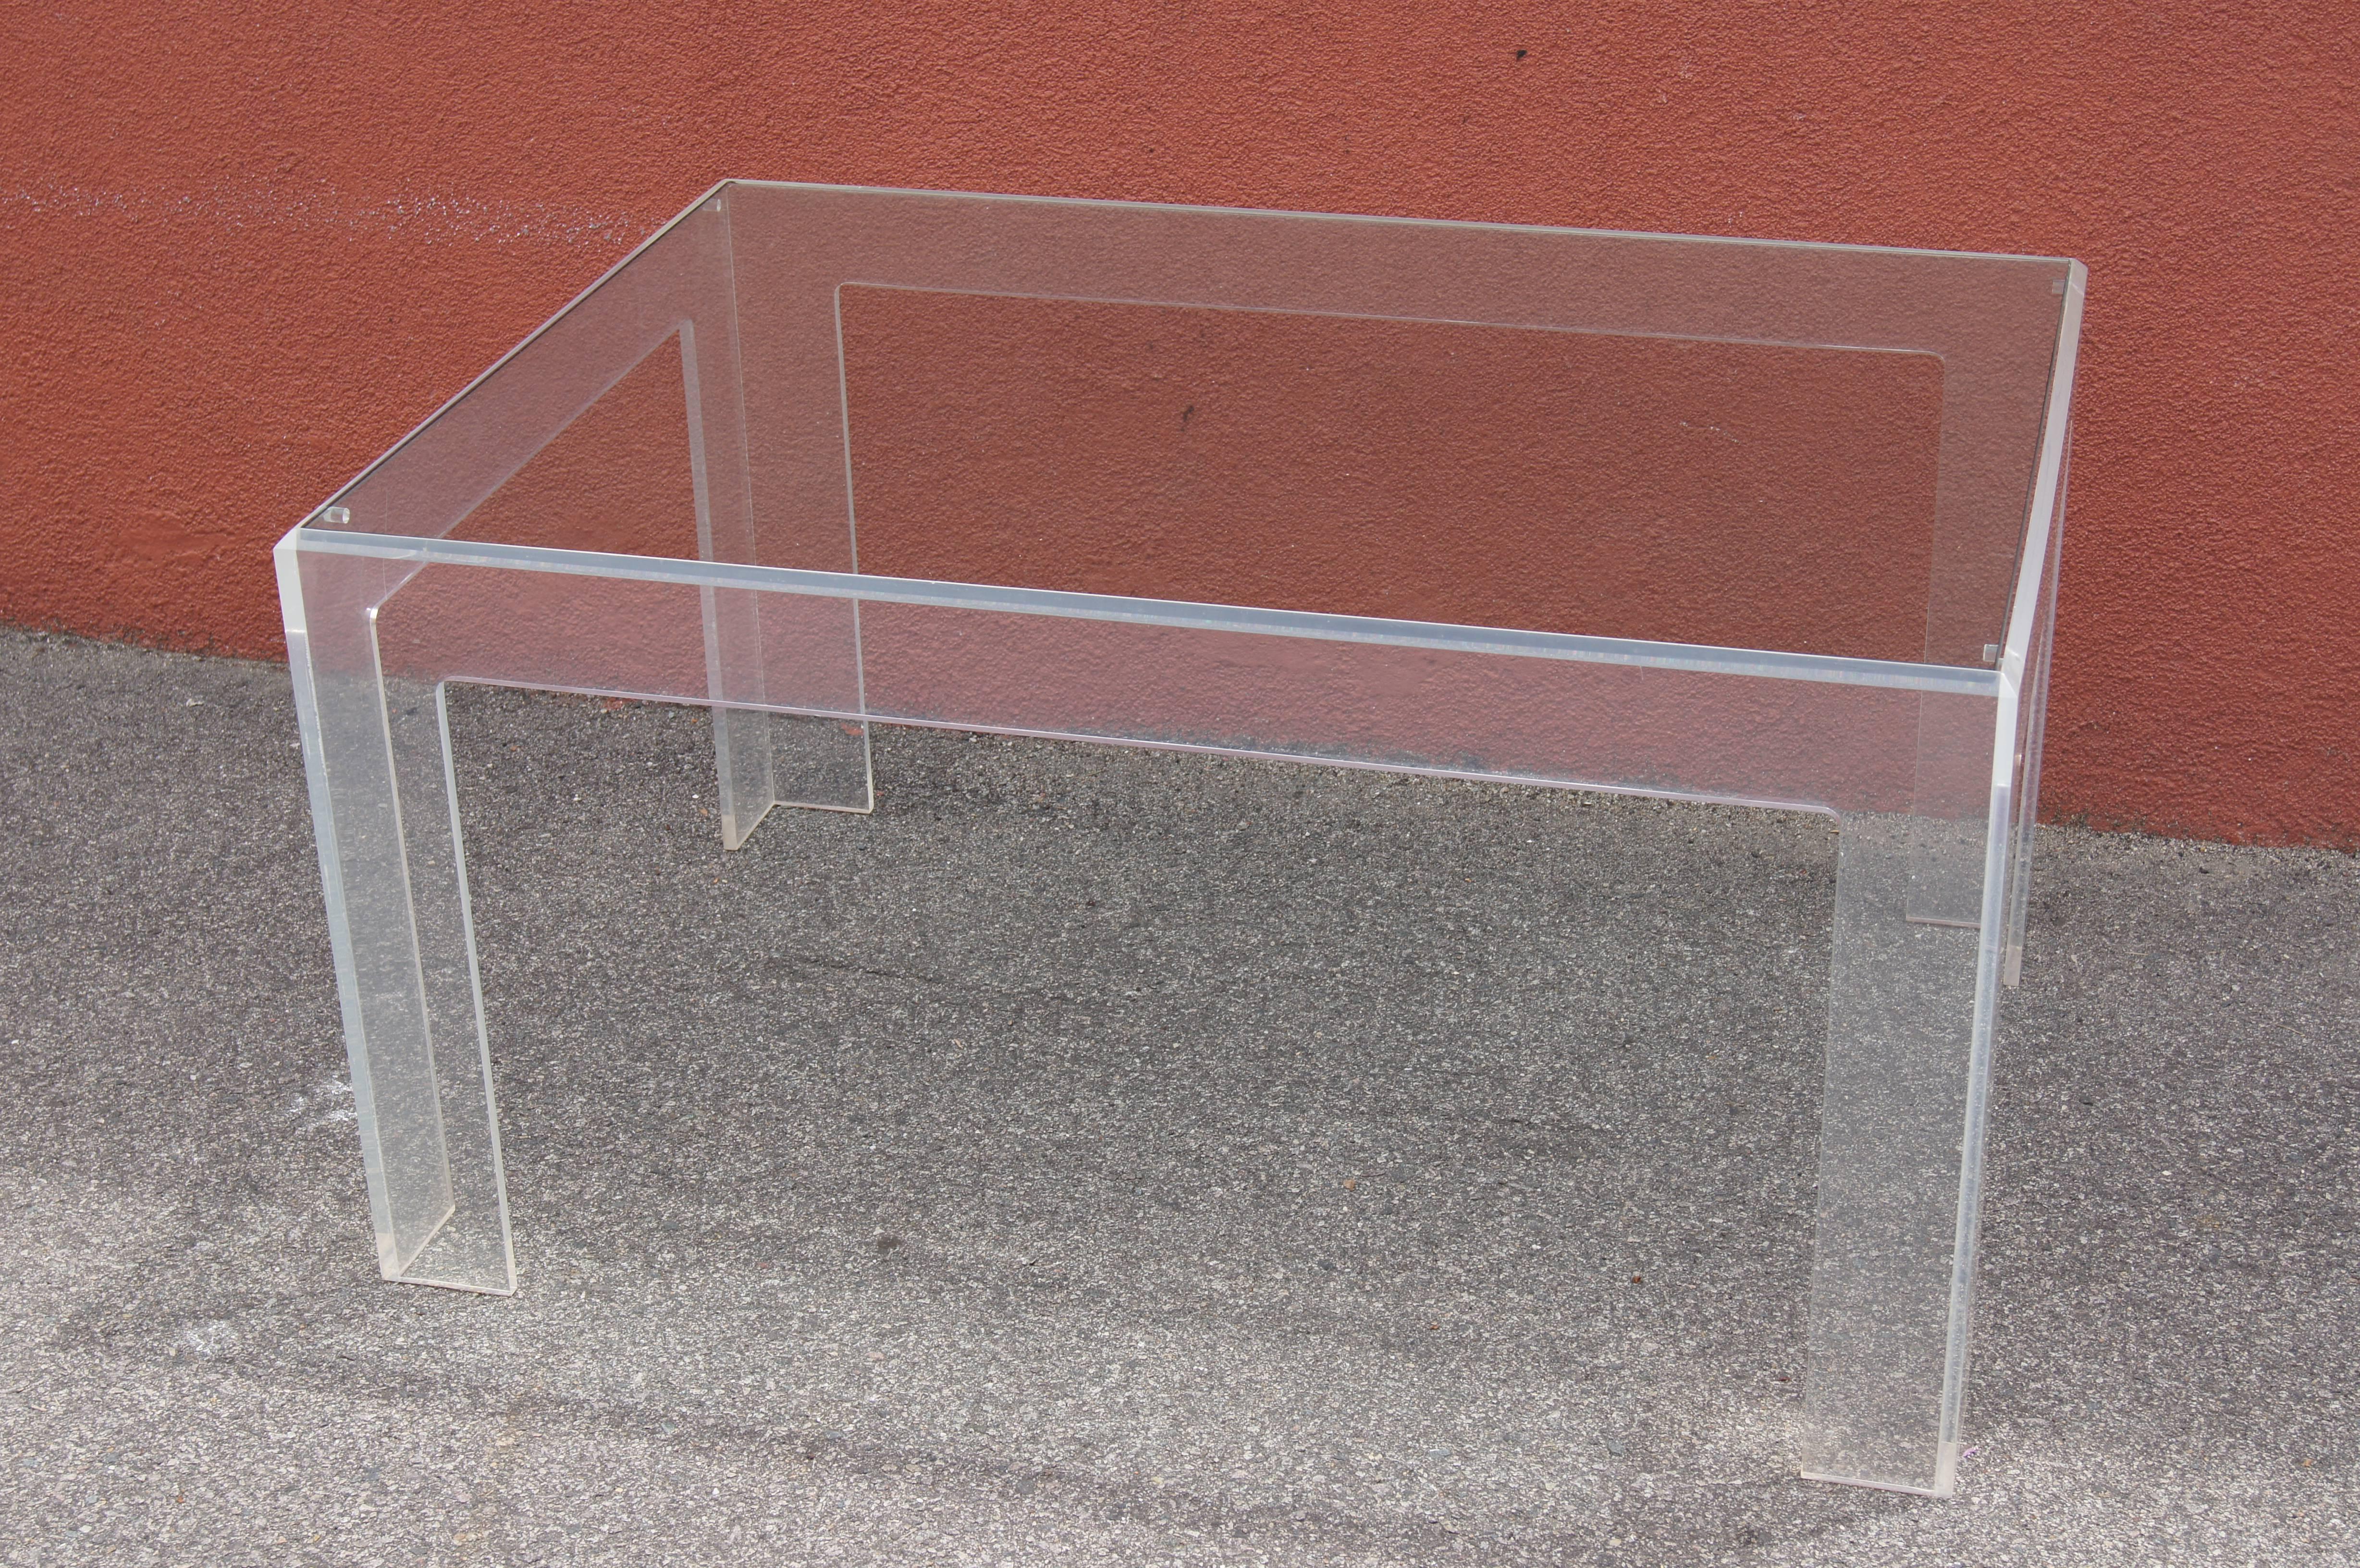 Acrylic master Jeffrey Bigelow designed and produced this Lucite coffee table, whose clarity of line works well in both modernist and eclectic settings. The piece is signed and dated 